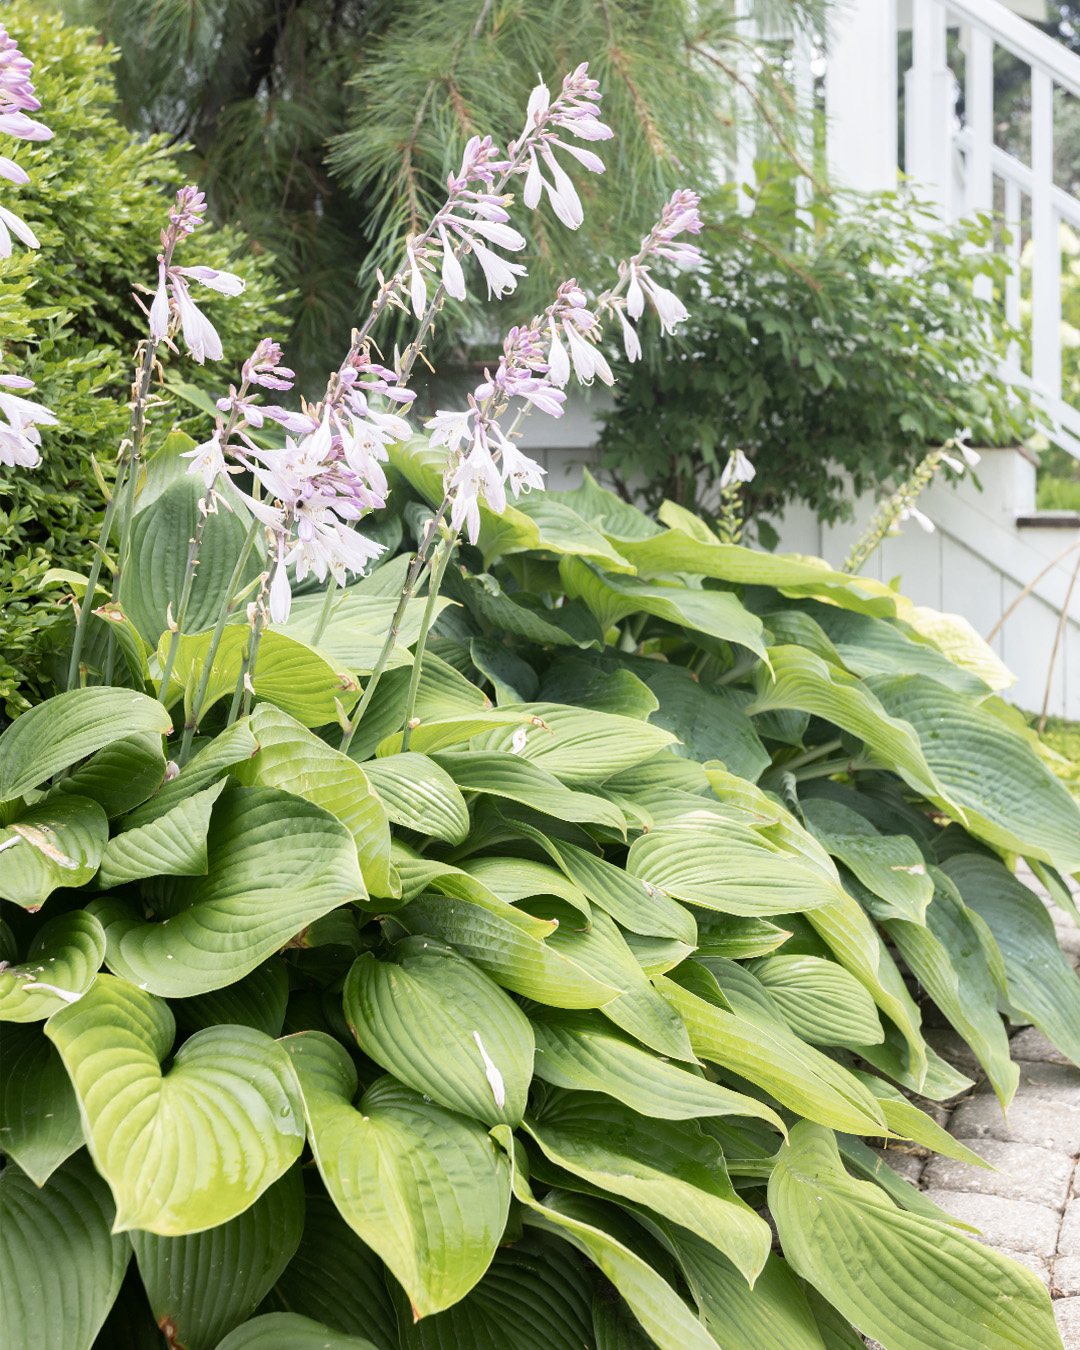 Summer hostas in full bloom with box wood and other shrubs.